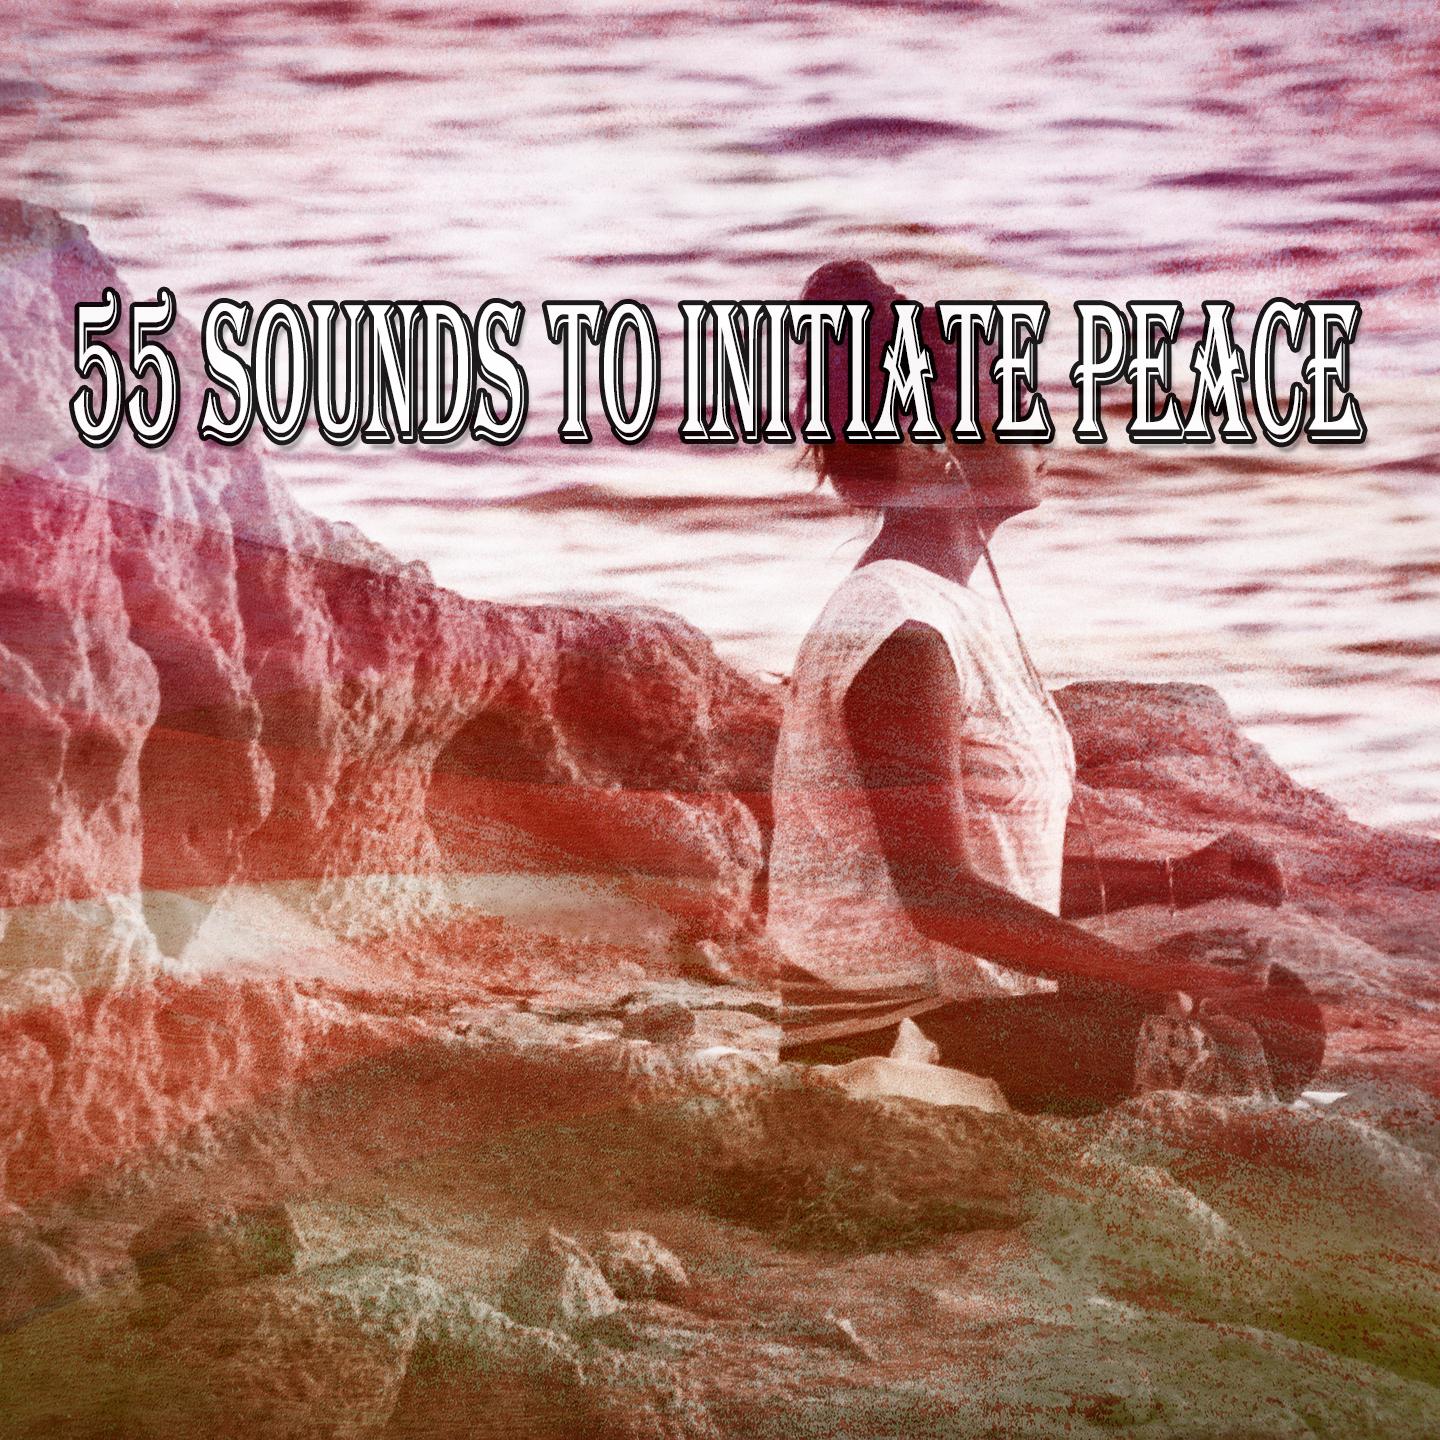 55 Sounds to Initiate Peace